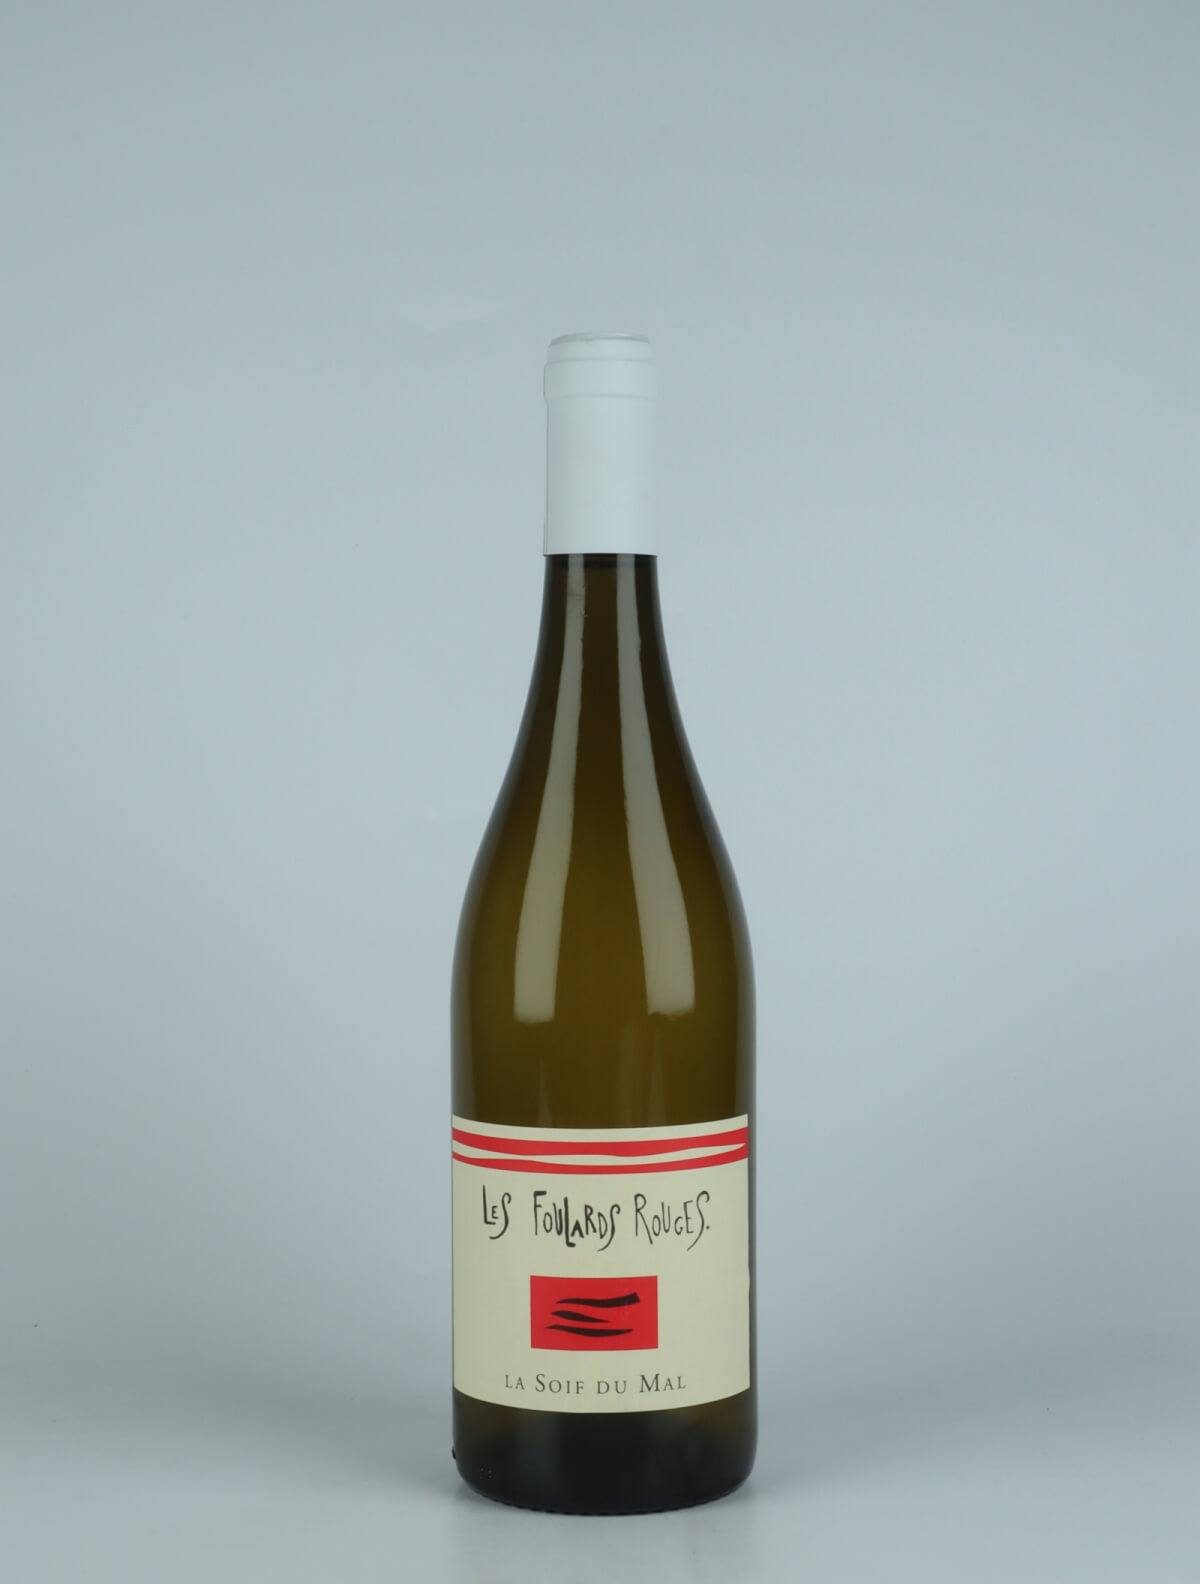 A bottle 2022 Soif du Mal Blanc White wine from Les Foulards Rouges, Languedoc in France